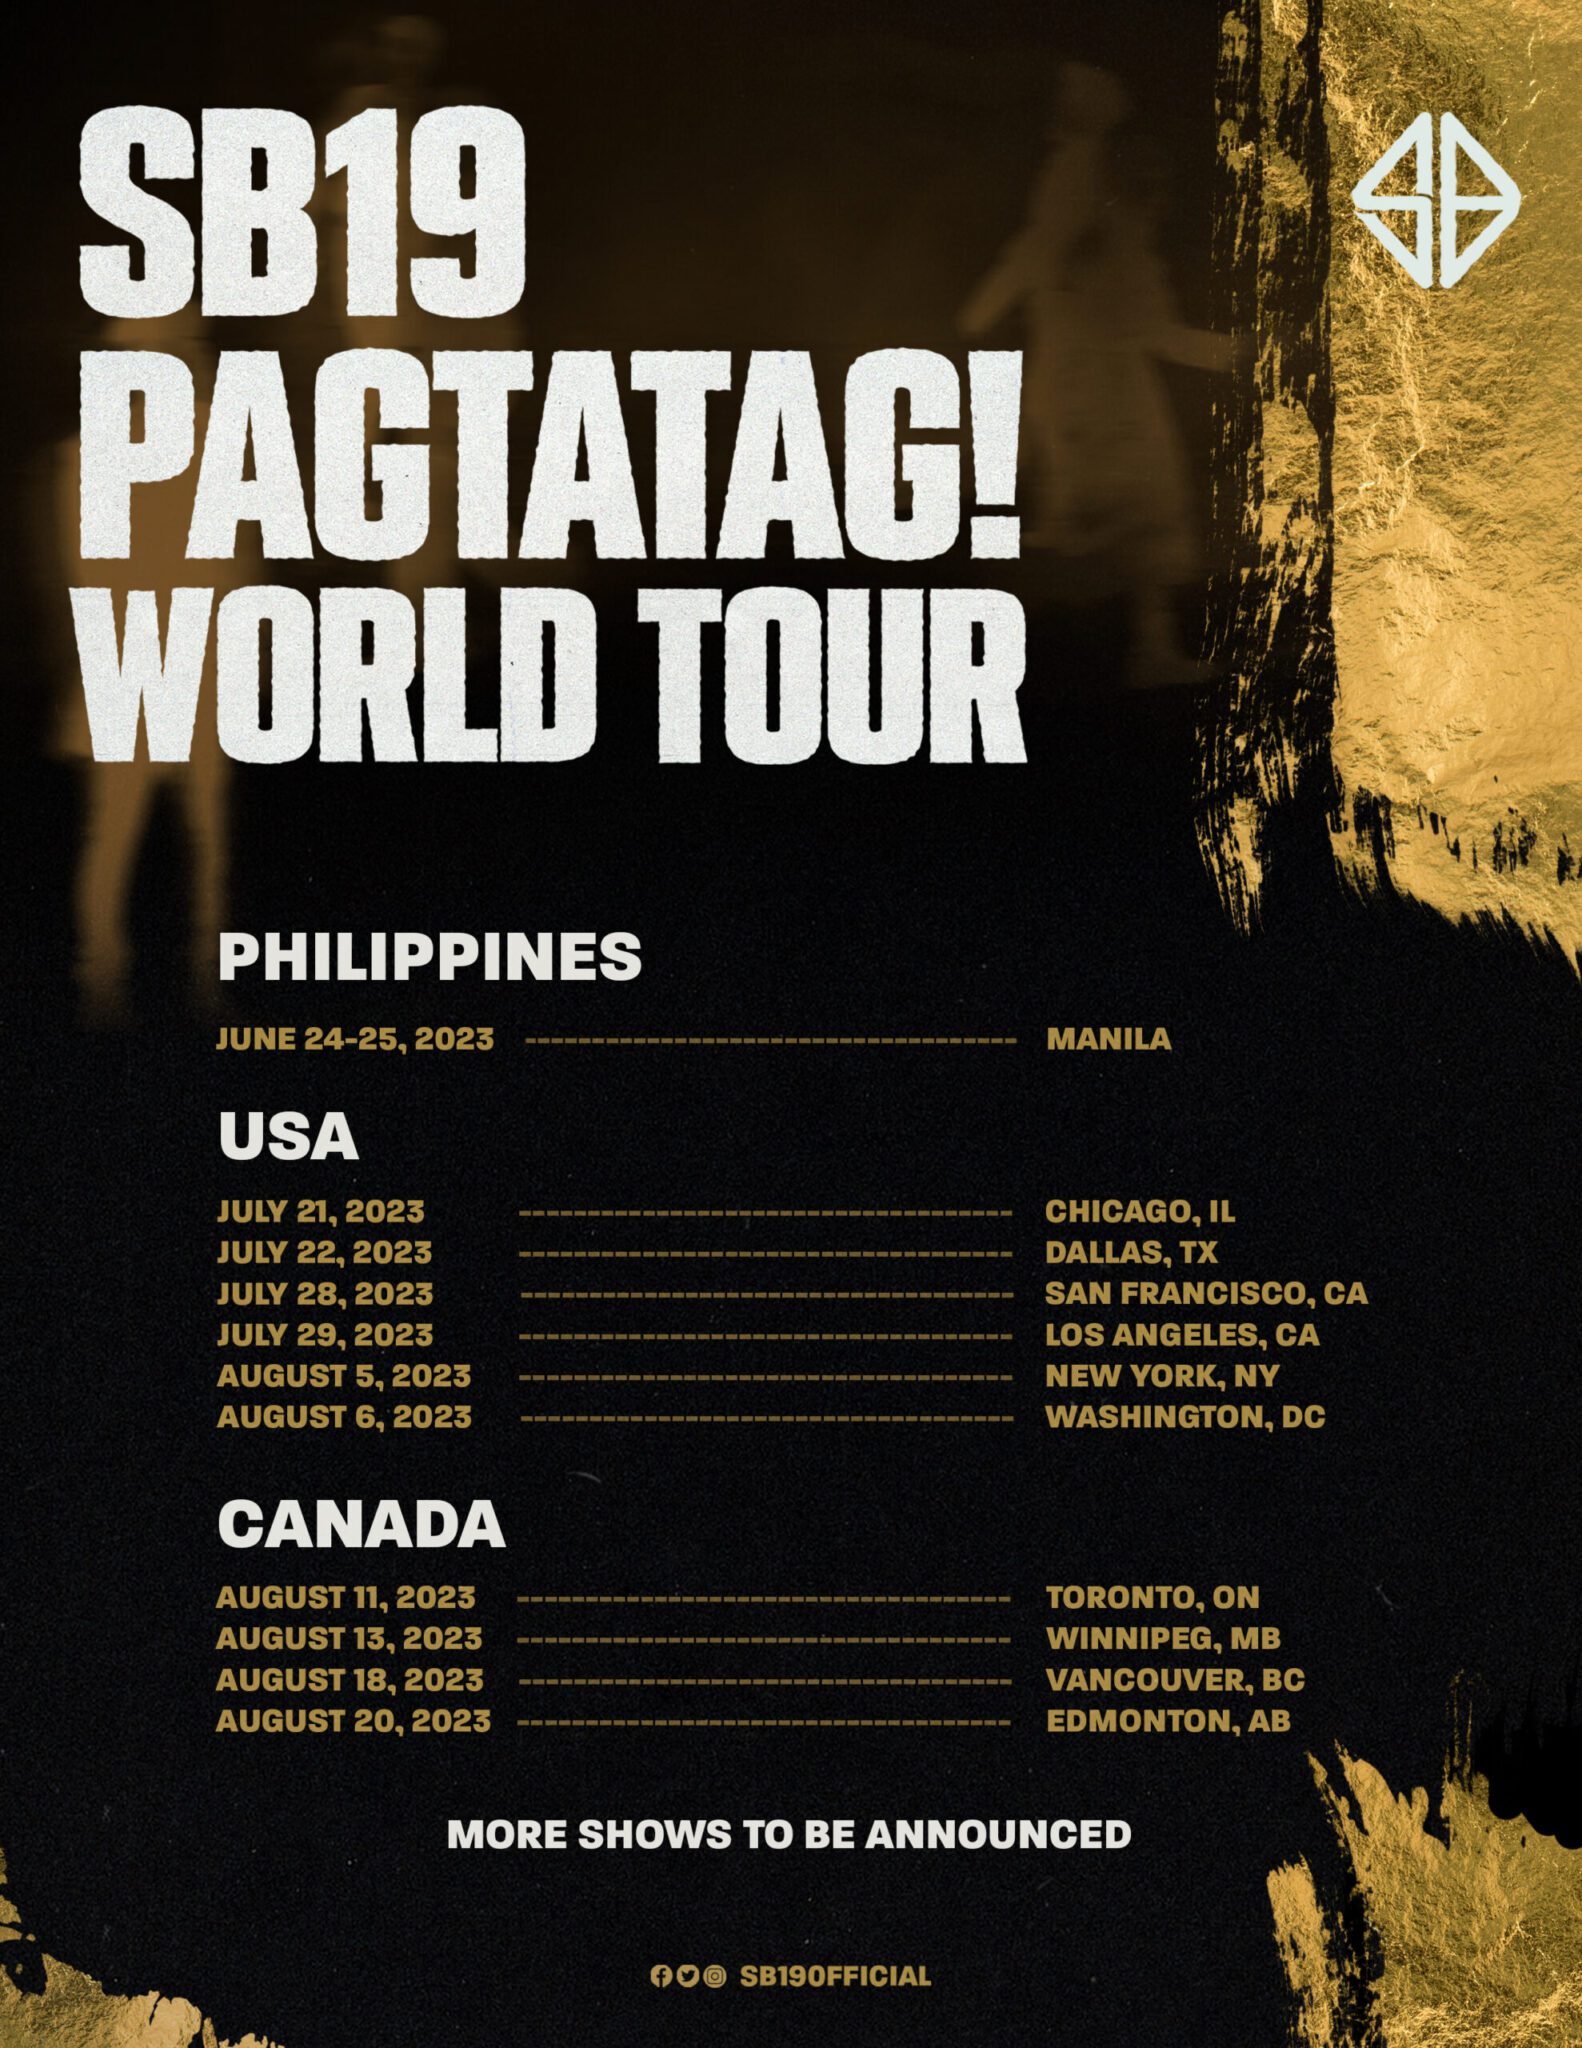 Sb19 Ushers New Era With Pagtatag And Upcoming World Tour